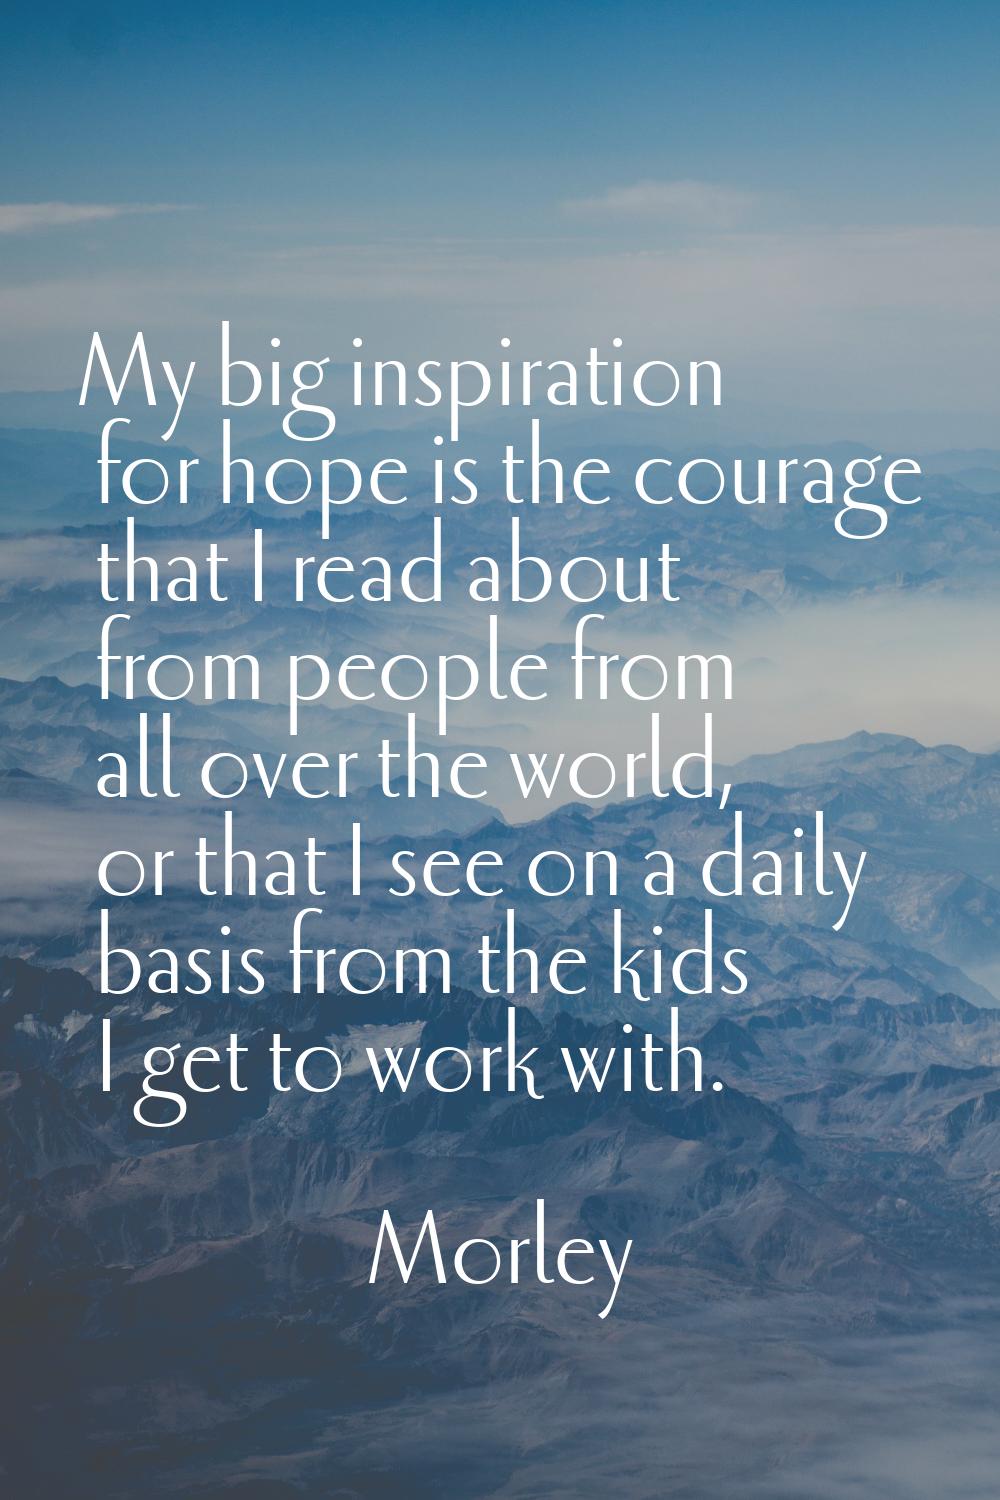 My big inspiration for hope is the courage that I read about from people from all over the world, o